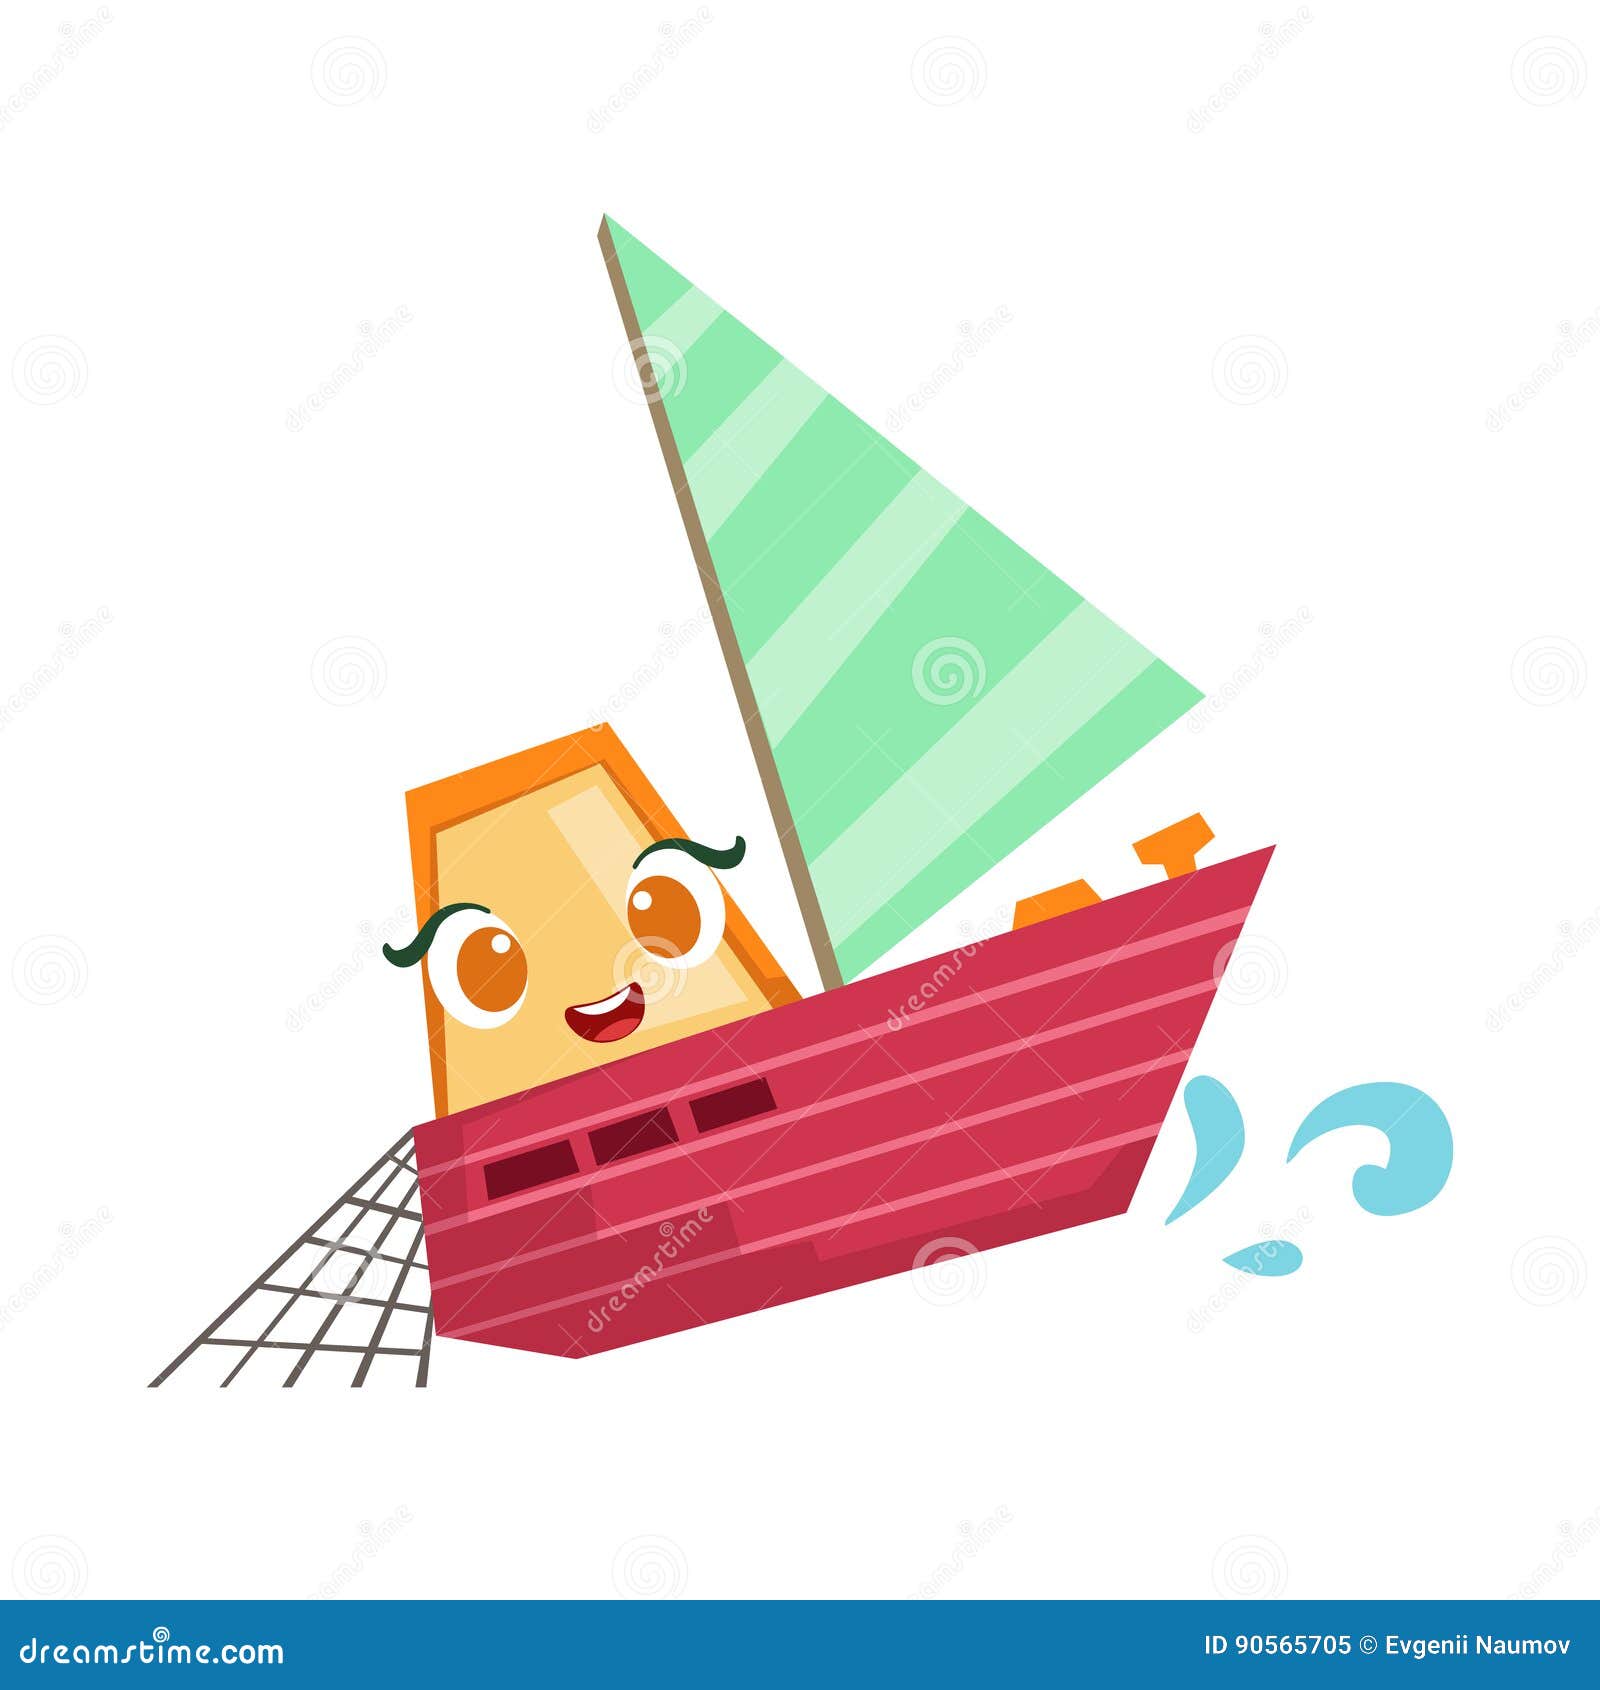 https://thumbs.dreamstime.com/z/sailing-fisherman-fishing-boat-cute-girly-toy-wooden-ship-face-cartoon-illustration-funny-isolated-water-transportation-90565705.jpg